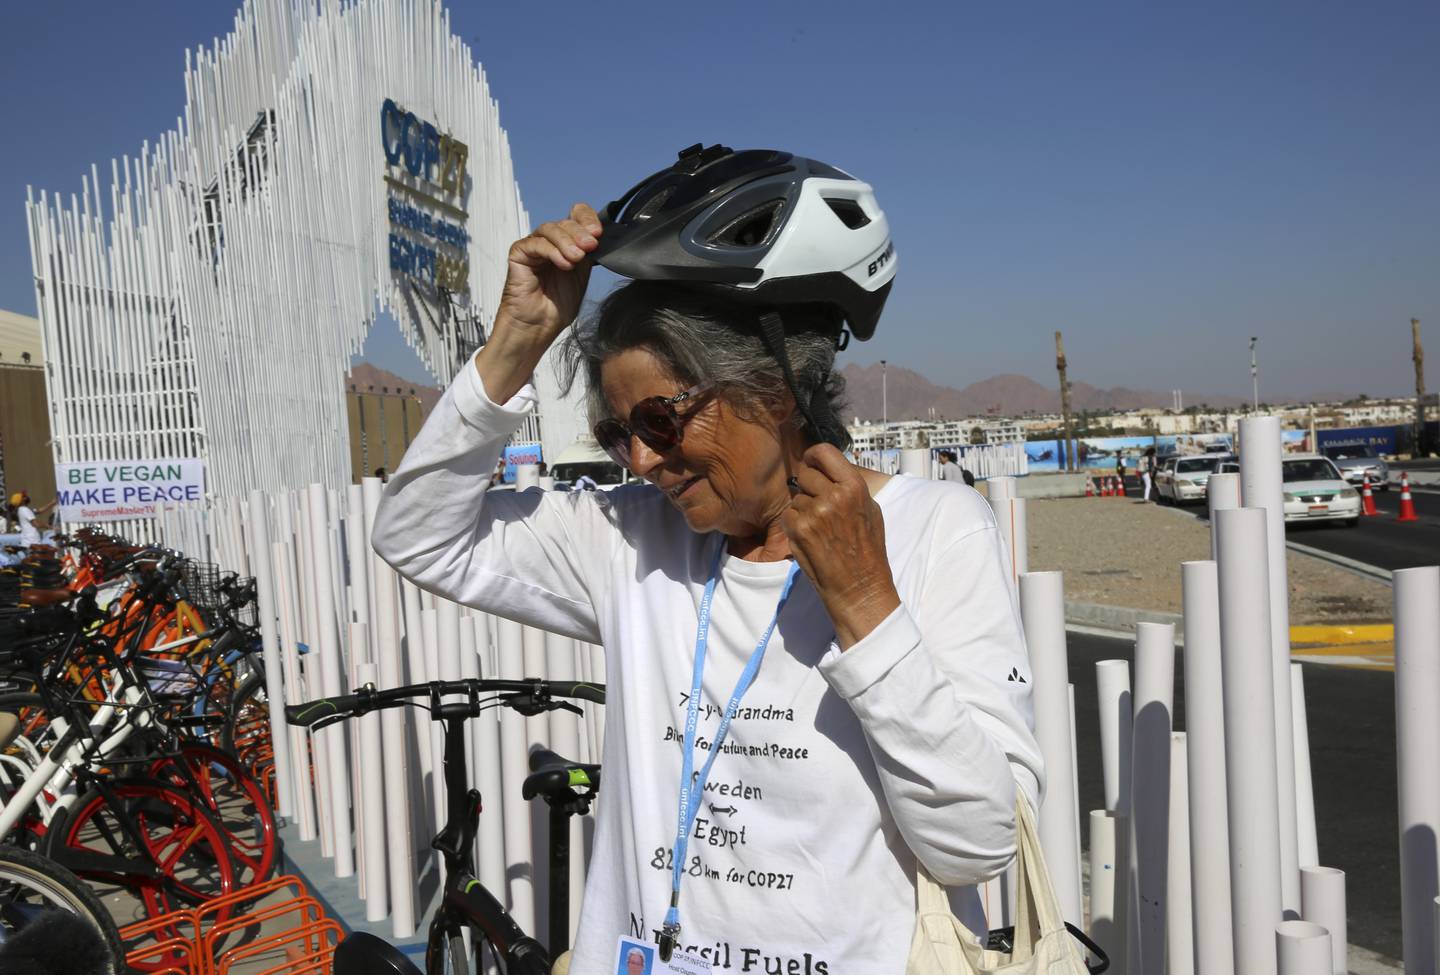 Dorothee has cycled through 17 countries, covering 8,228km and averaging about 80km a day. AP